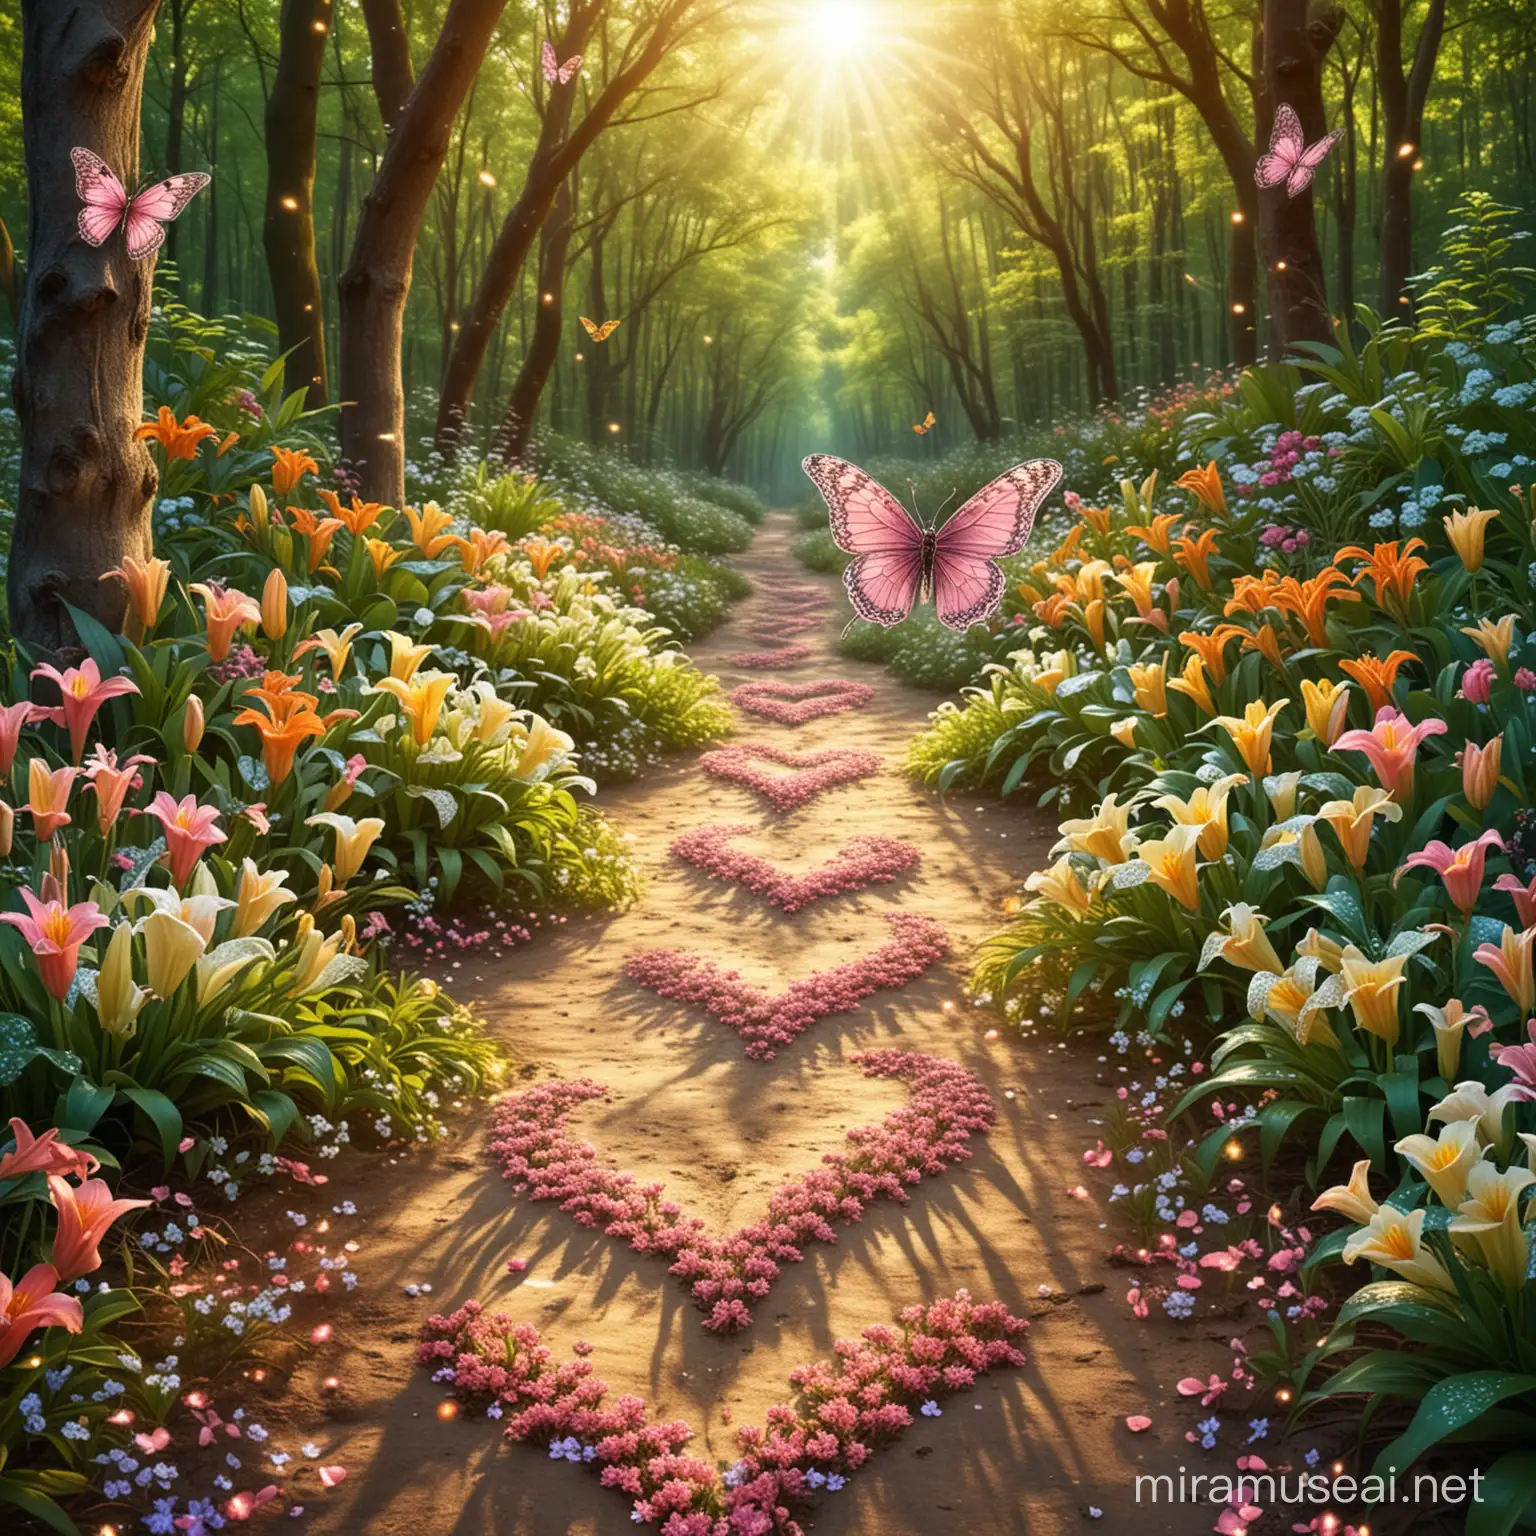 beautiful glitter glowing hearts path, beautiful spring forest day, sun rays, filigree lacey butterfly, beautiful colorful lilies of the valley flowers